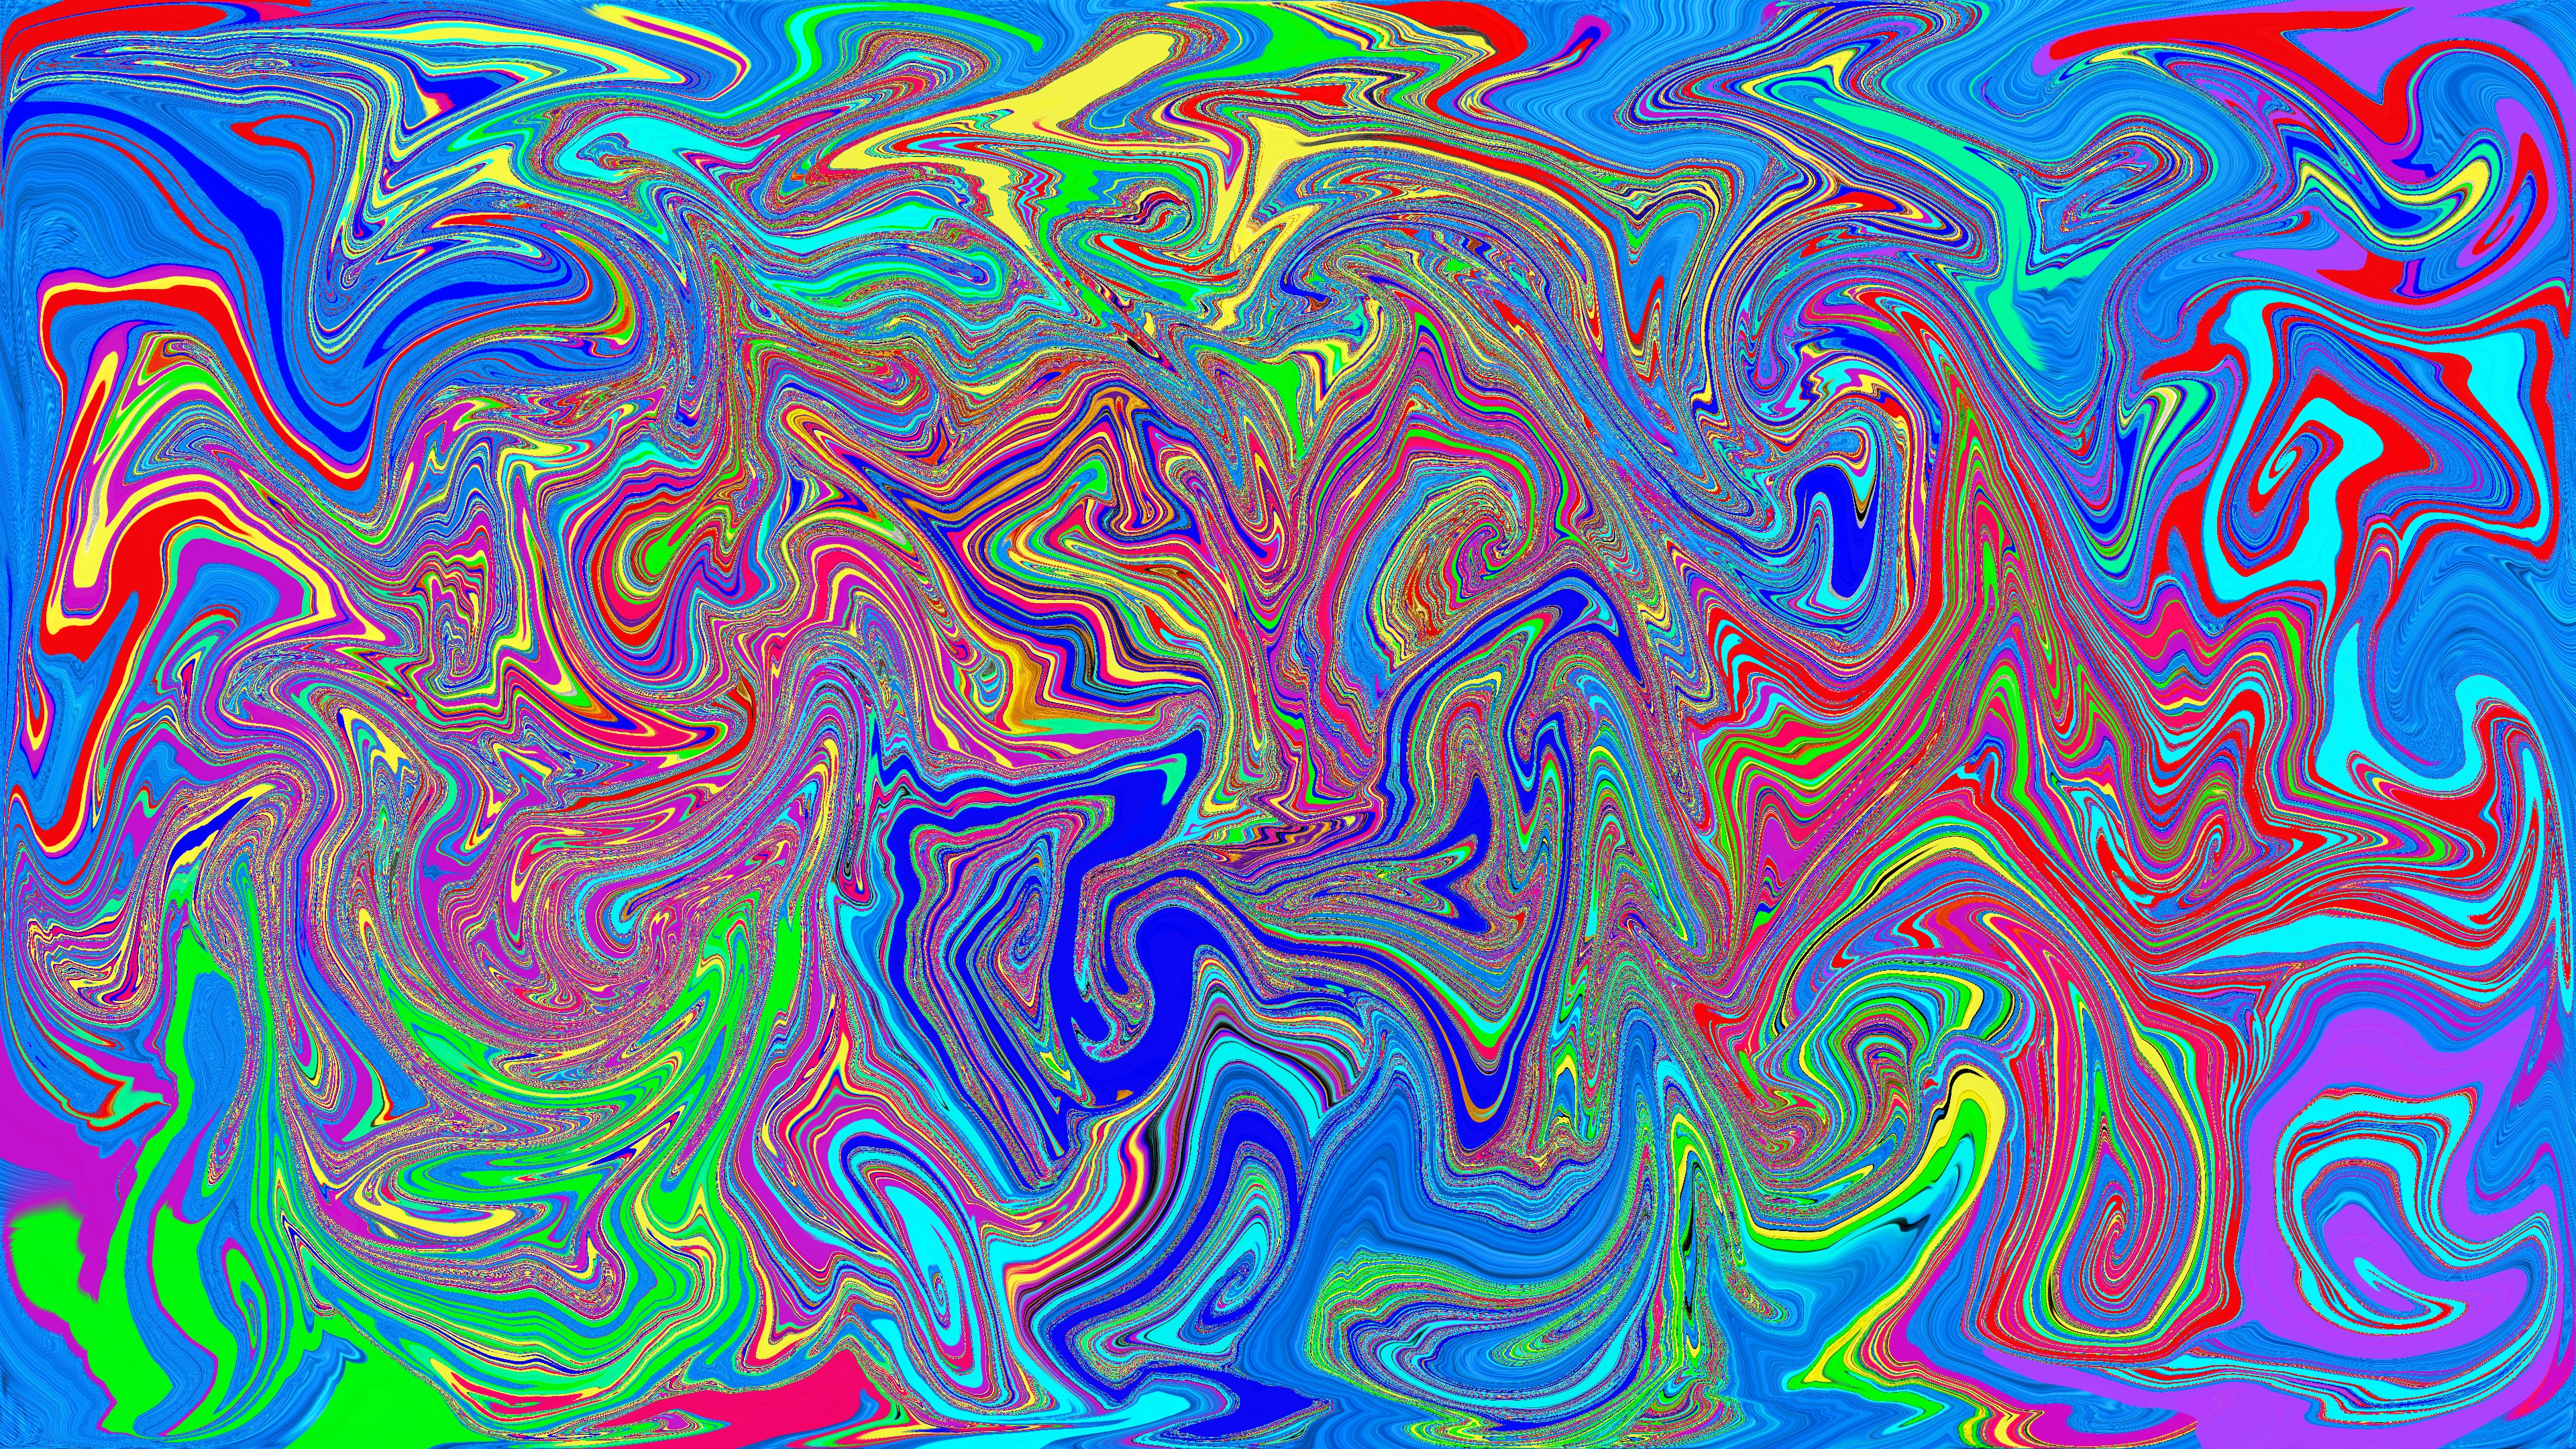 General 3840x2160 trippy colorful LSD shapes abstract digital art